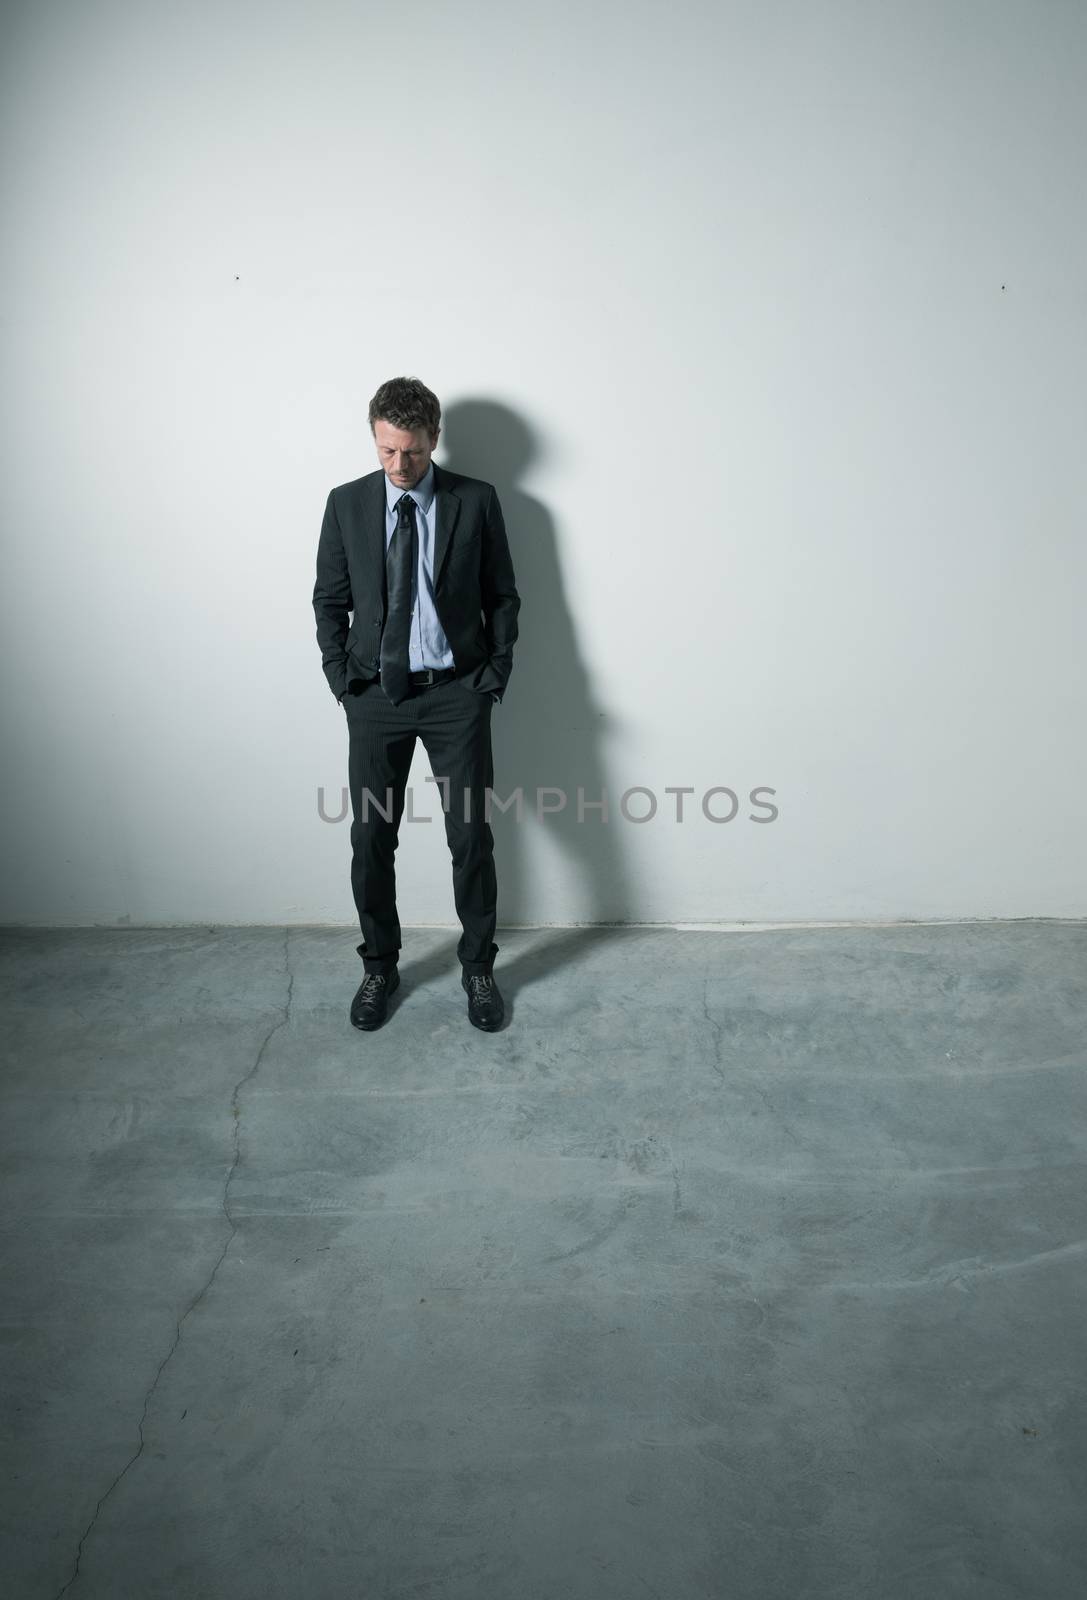 Tired pensive businessman standing with hands in pockets in an empty room with dramatic lighting.